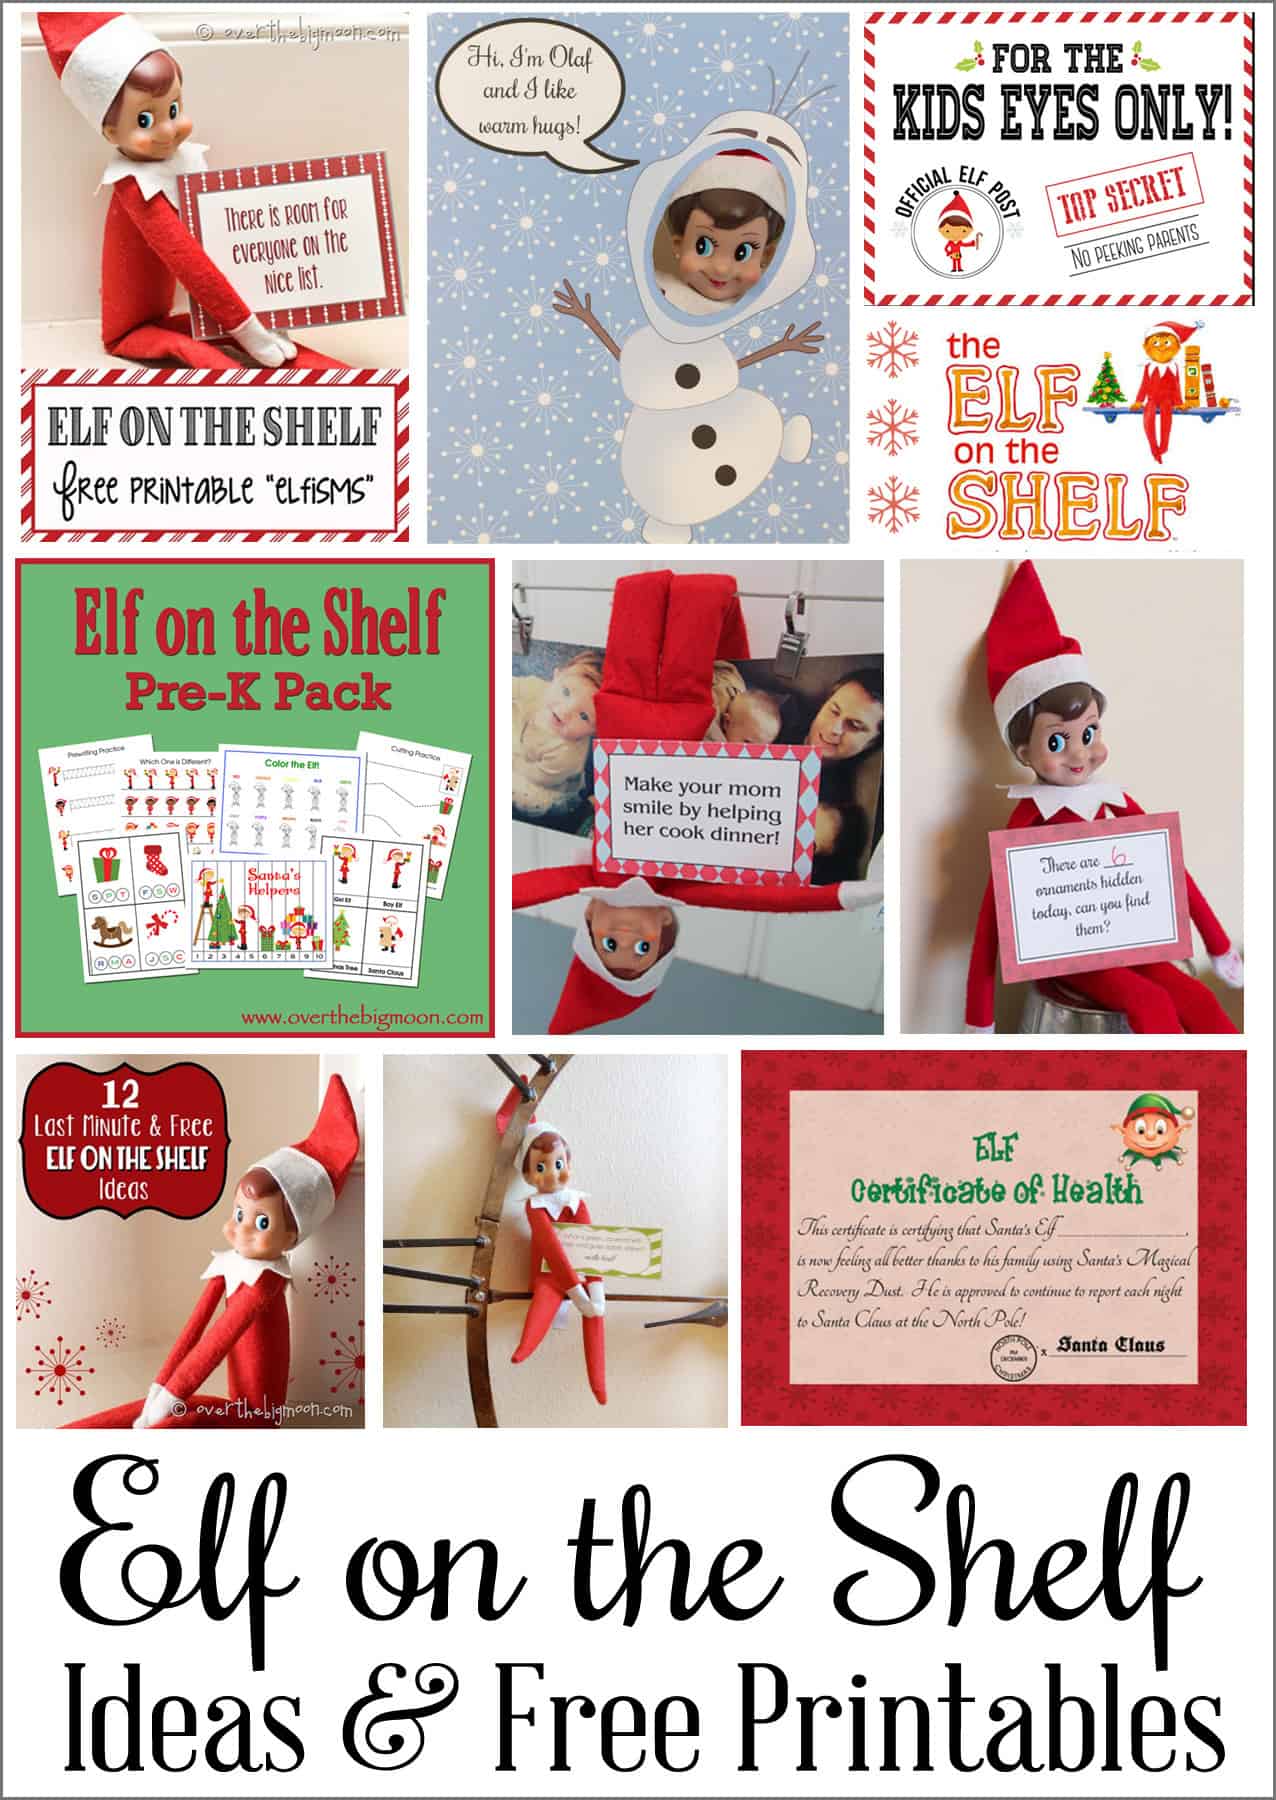 elf-on-the-shelf-printable-signs-but-sometimes-you-want-even-more